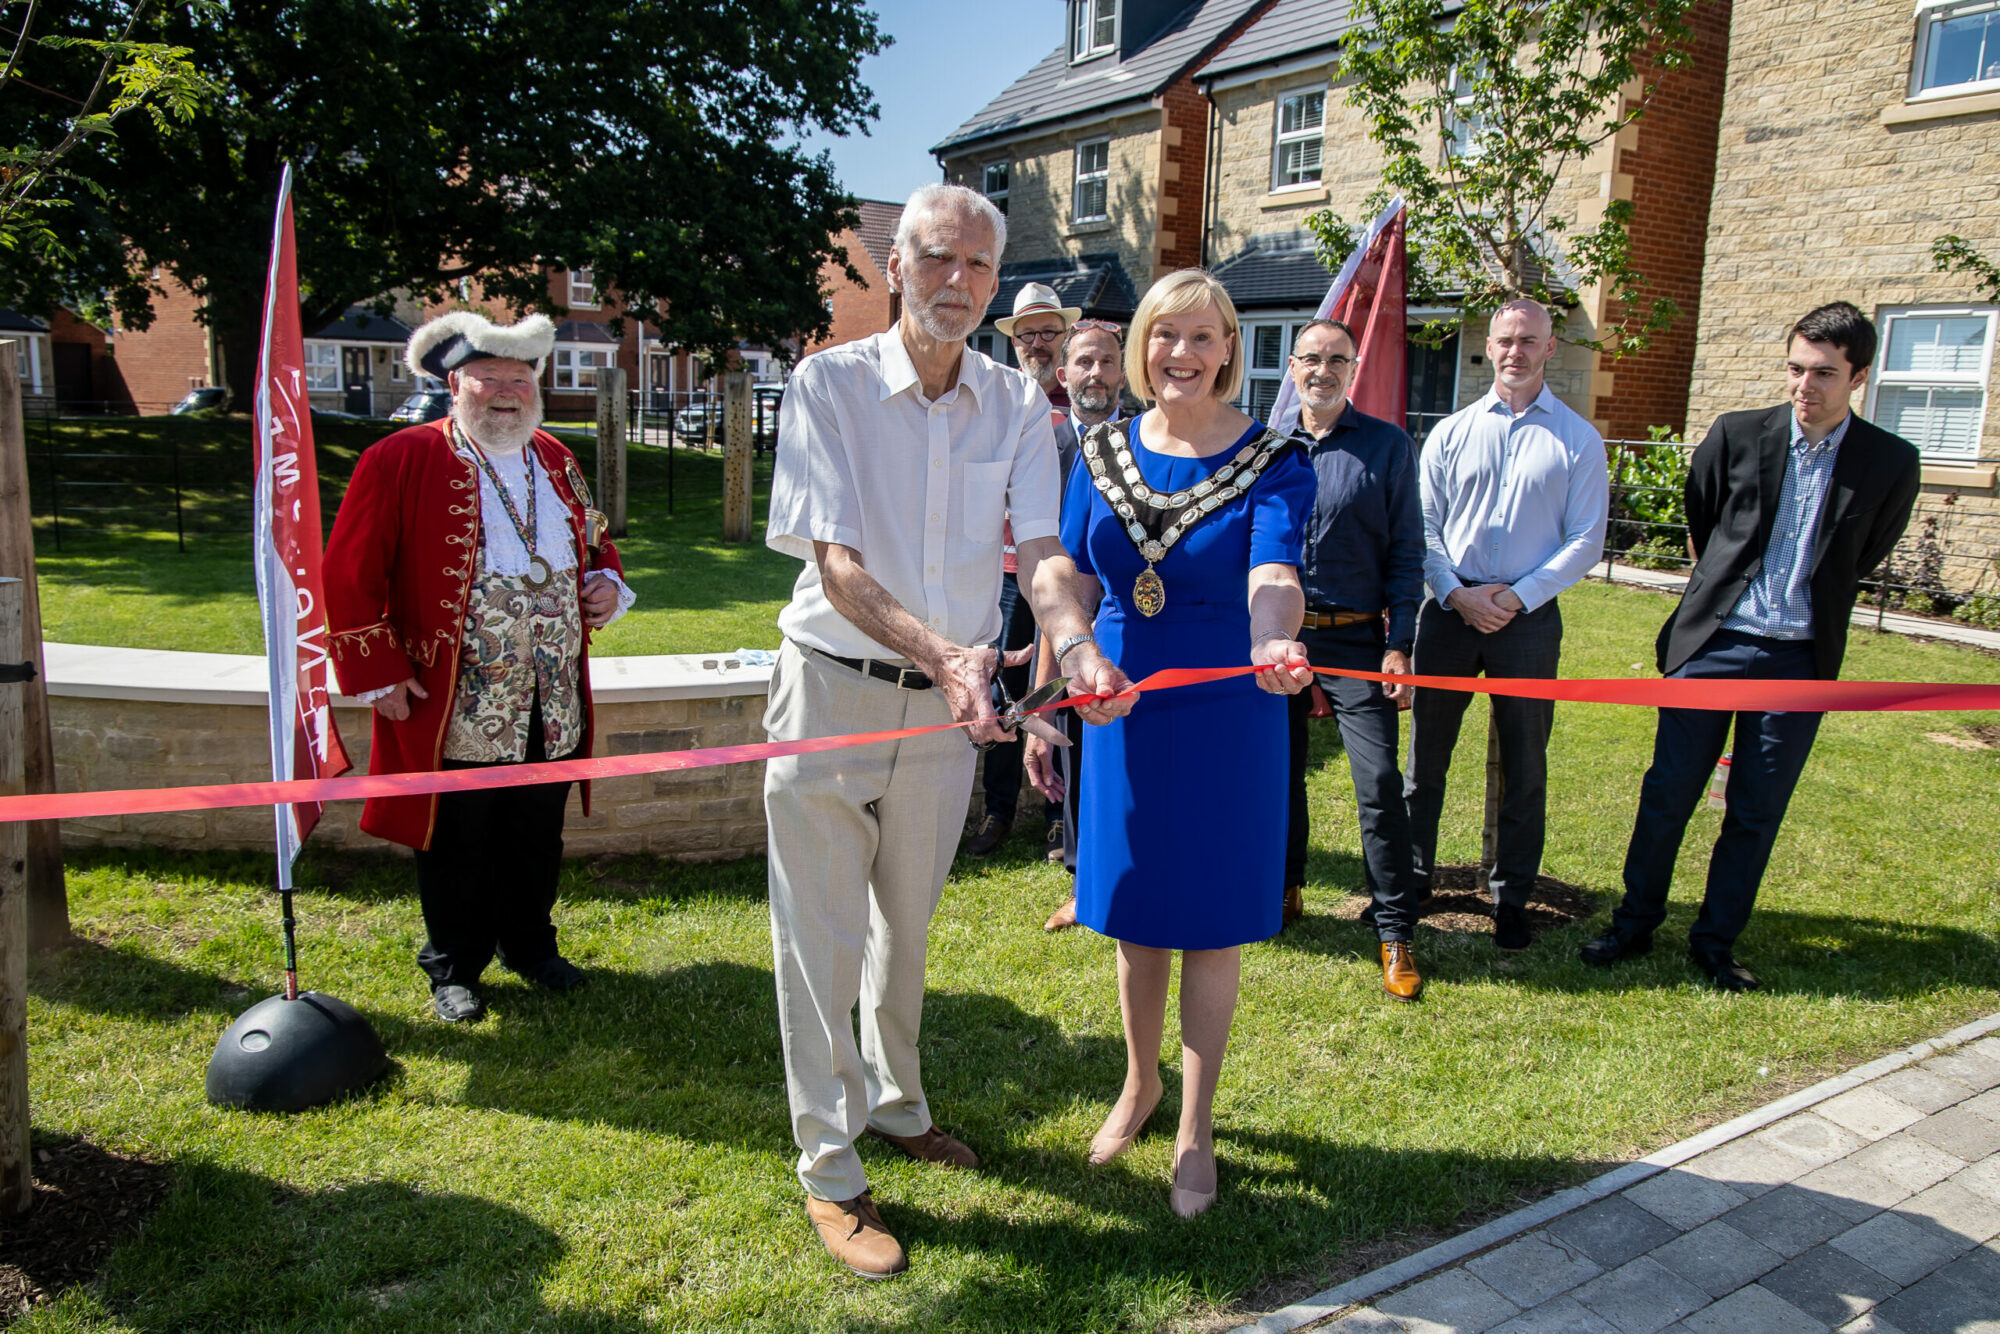 Dedicating the new community open space at Newland Place, Trowbridge